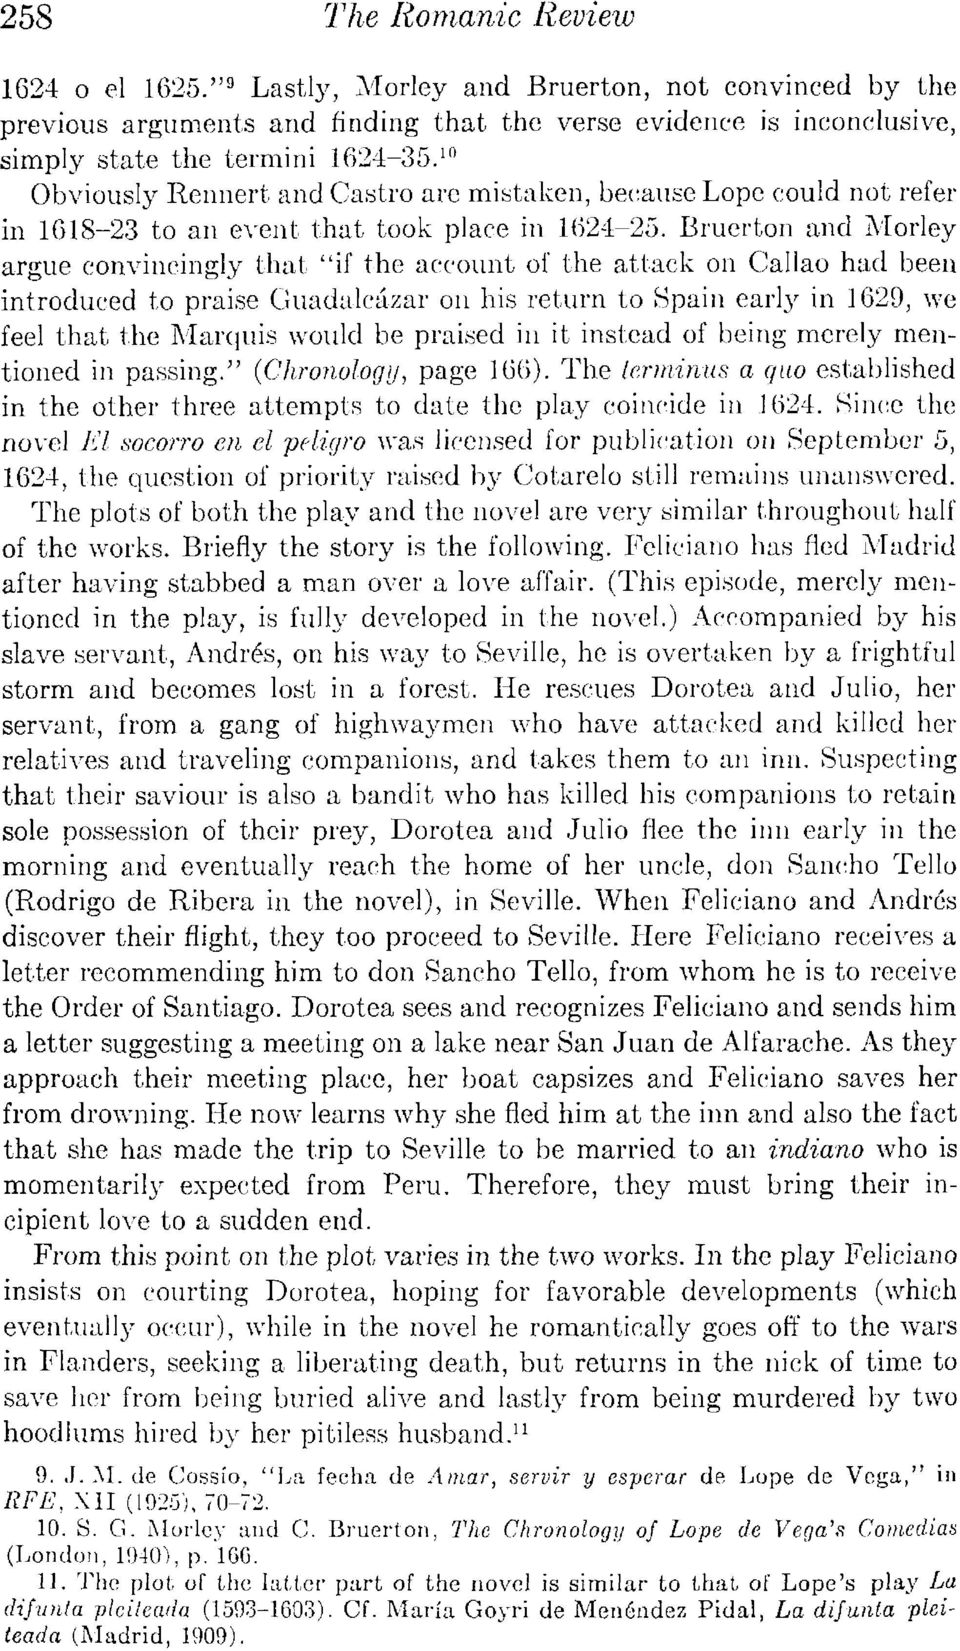 Bruerton and Morley argue convincingly that "if the account of the attack on Callao had been introduced to praise Guadalcázar on his return to Spain early in 1629, we feel that the Marquis would be